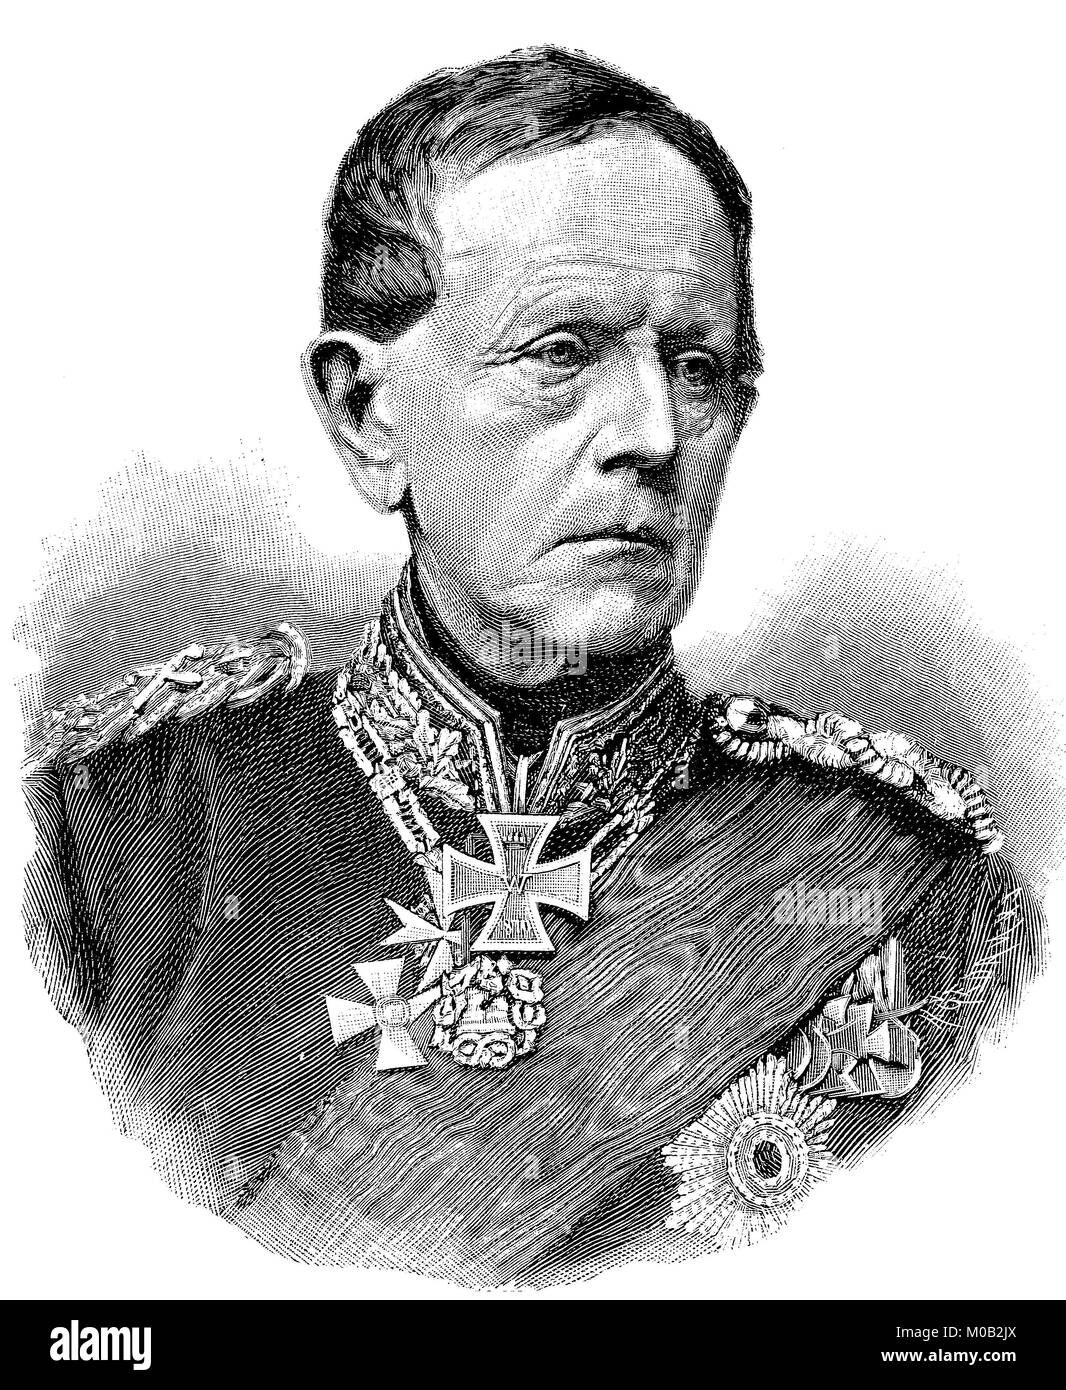 Helmuth Karl Bernhard von Moltke, 26 October 1800 - 24 April 1891, was a Prussian Field Marshal and Chief of the General Staff and was also active as a writer, digital improved reproduction of an original print from 1880 Stock Photo